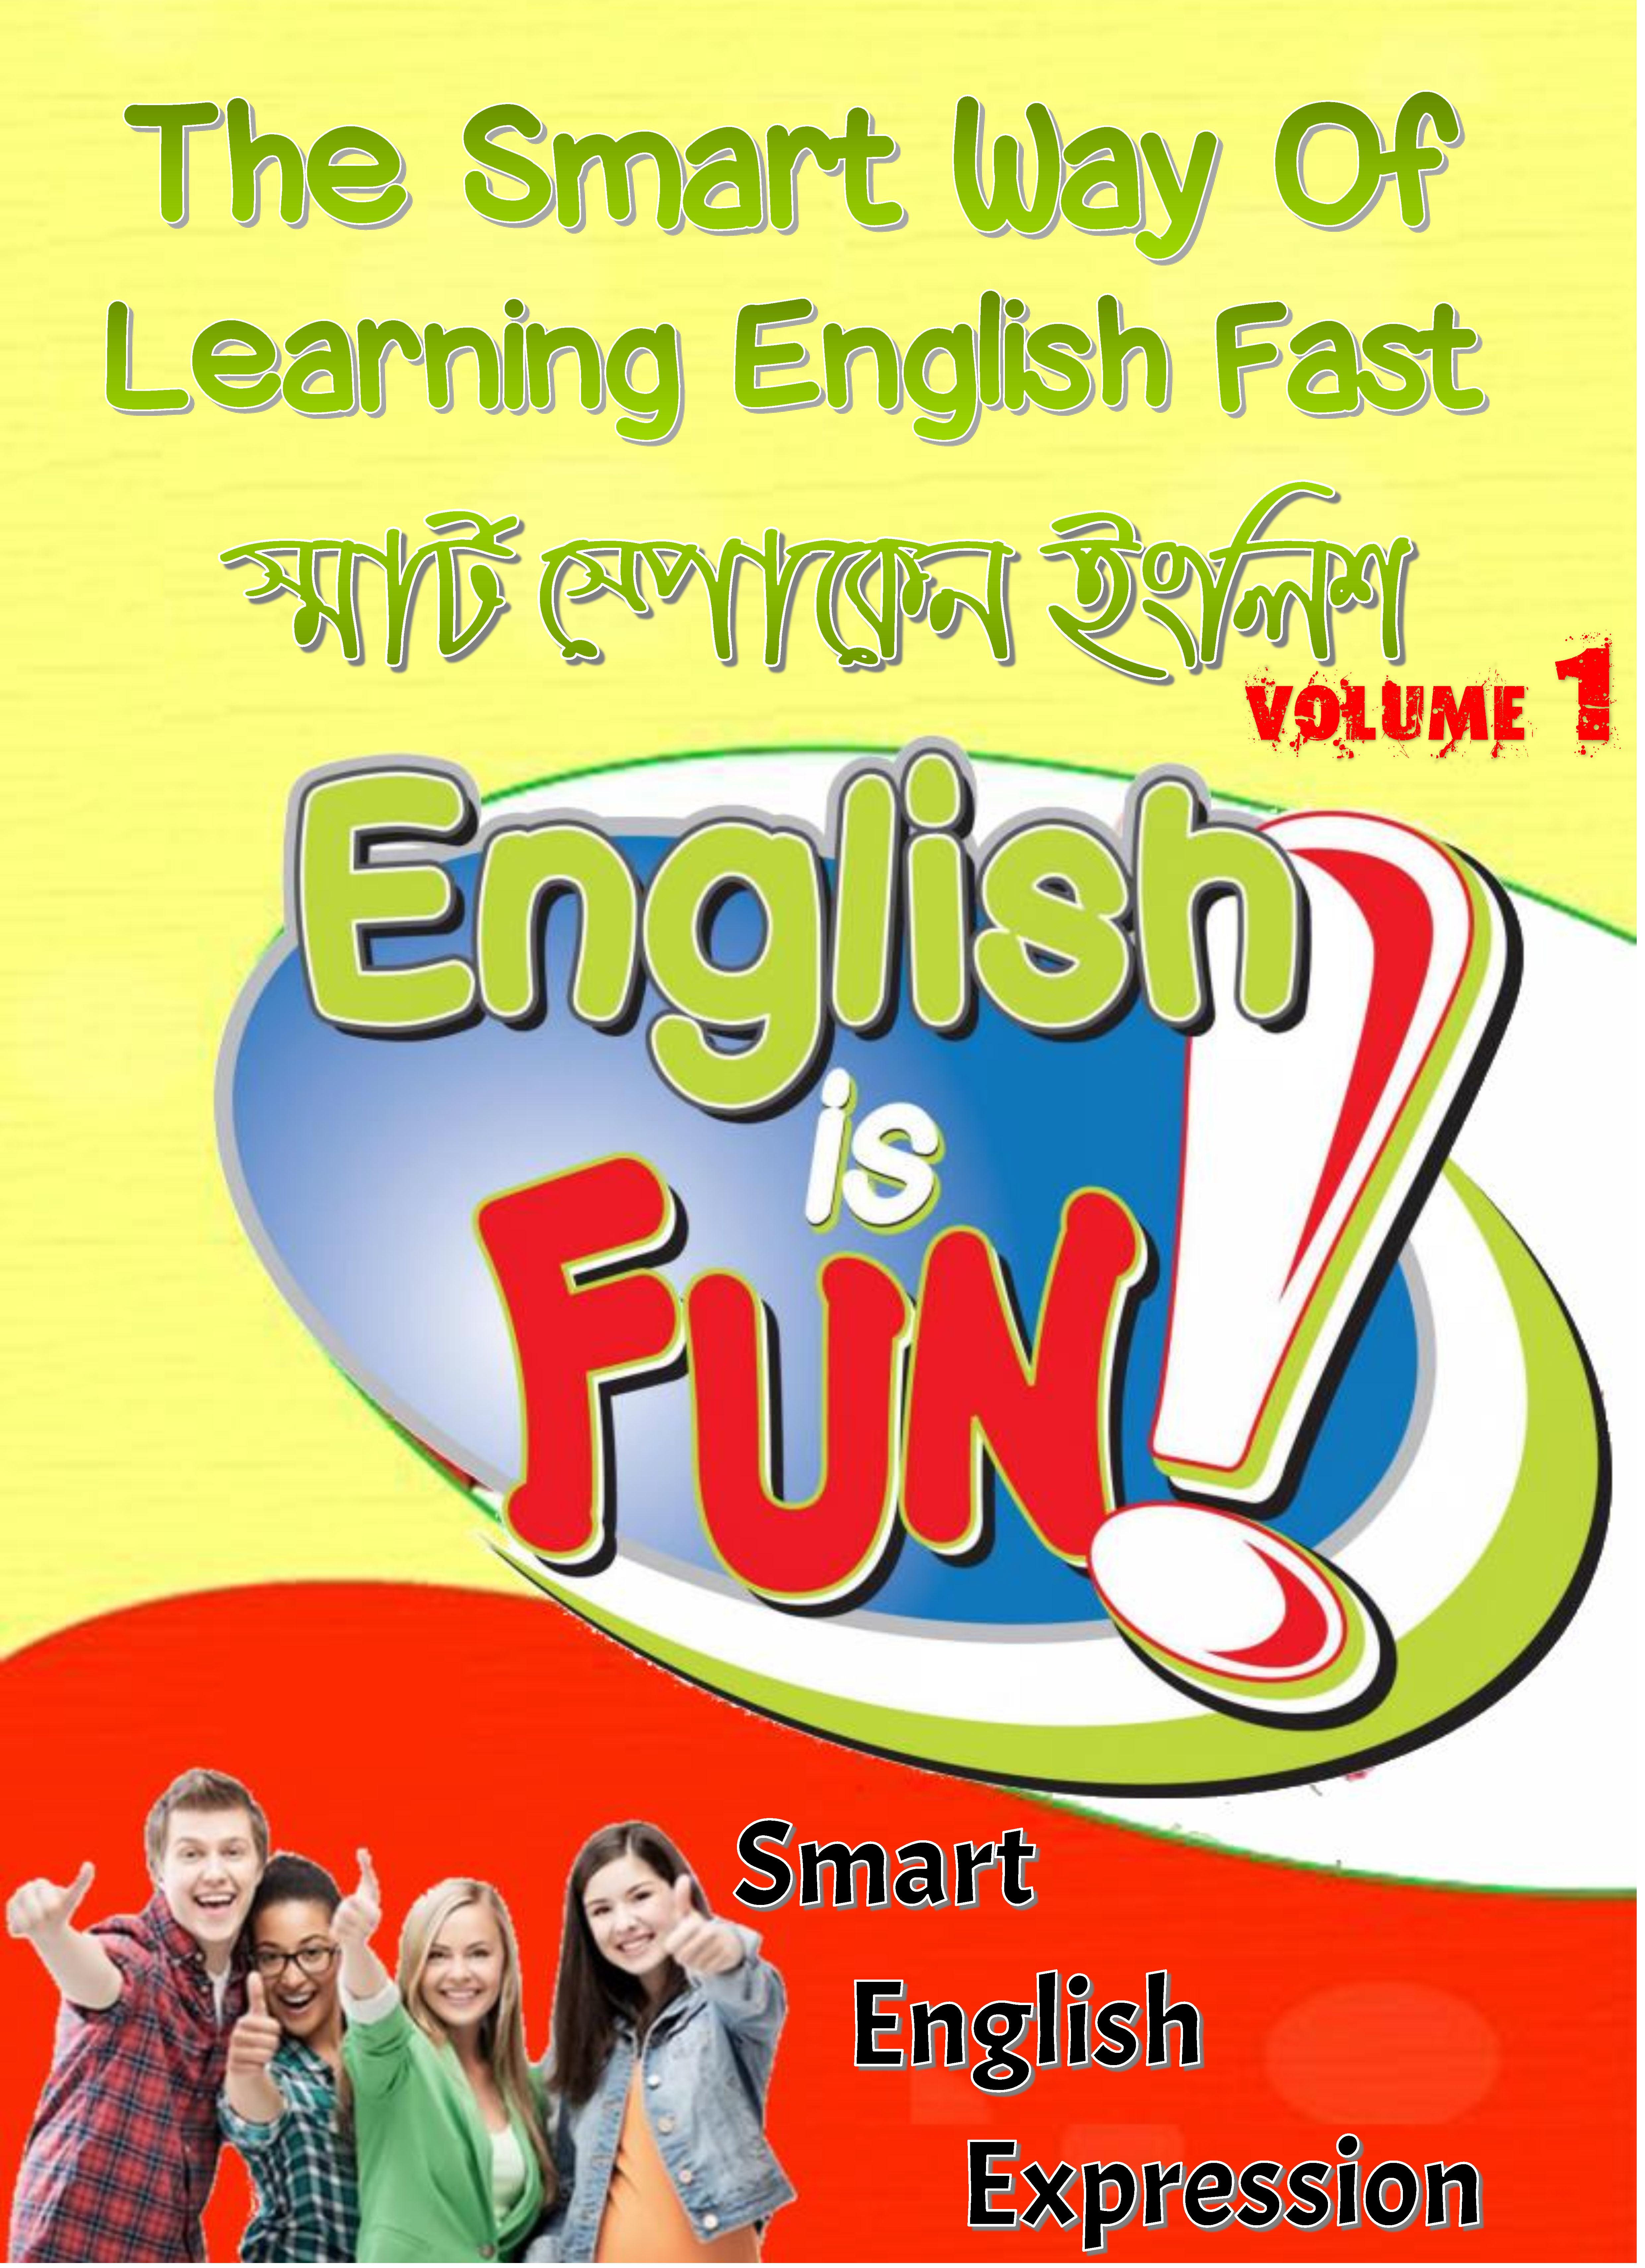 Thumbnail of The Smart Way Of Learning English Fast